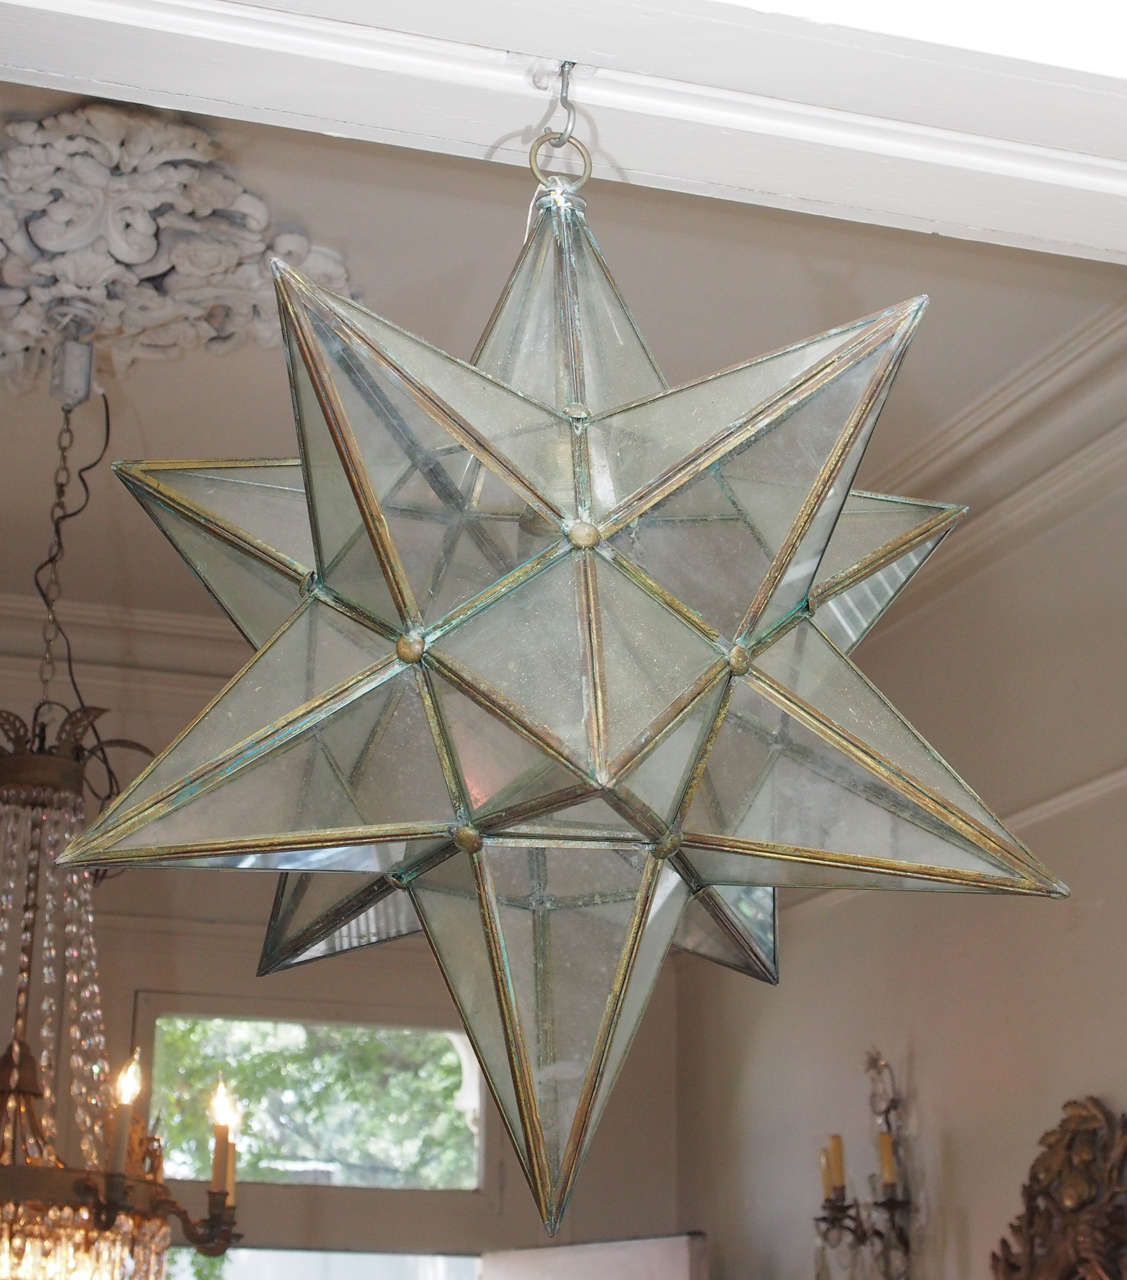 Pair of 19th century, twelve-pointed  star chandeliers. Not wired